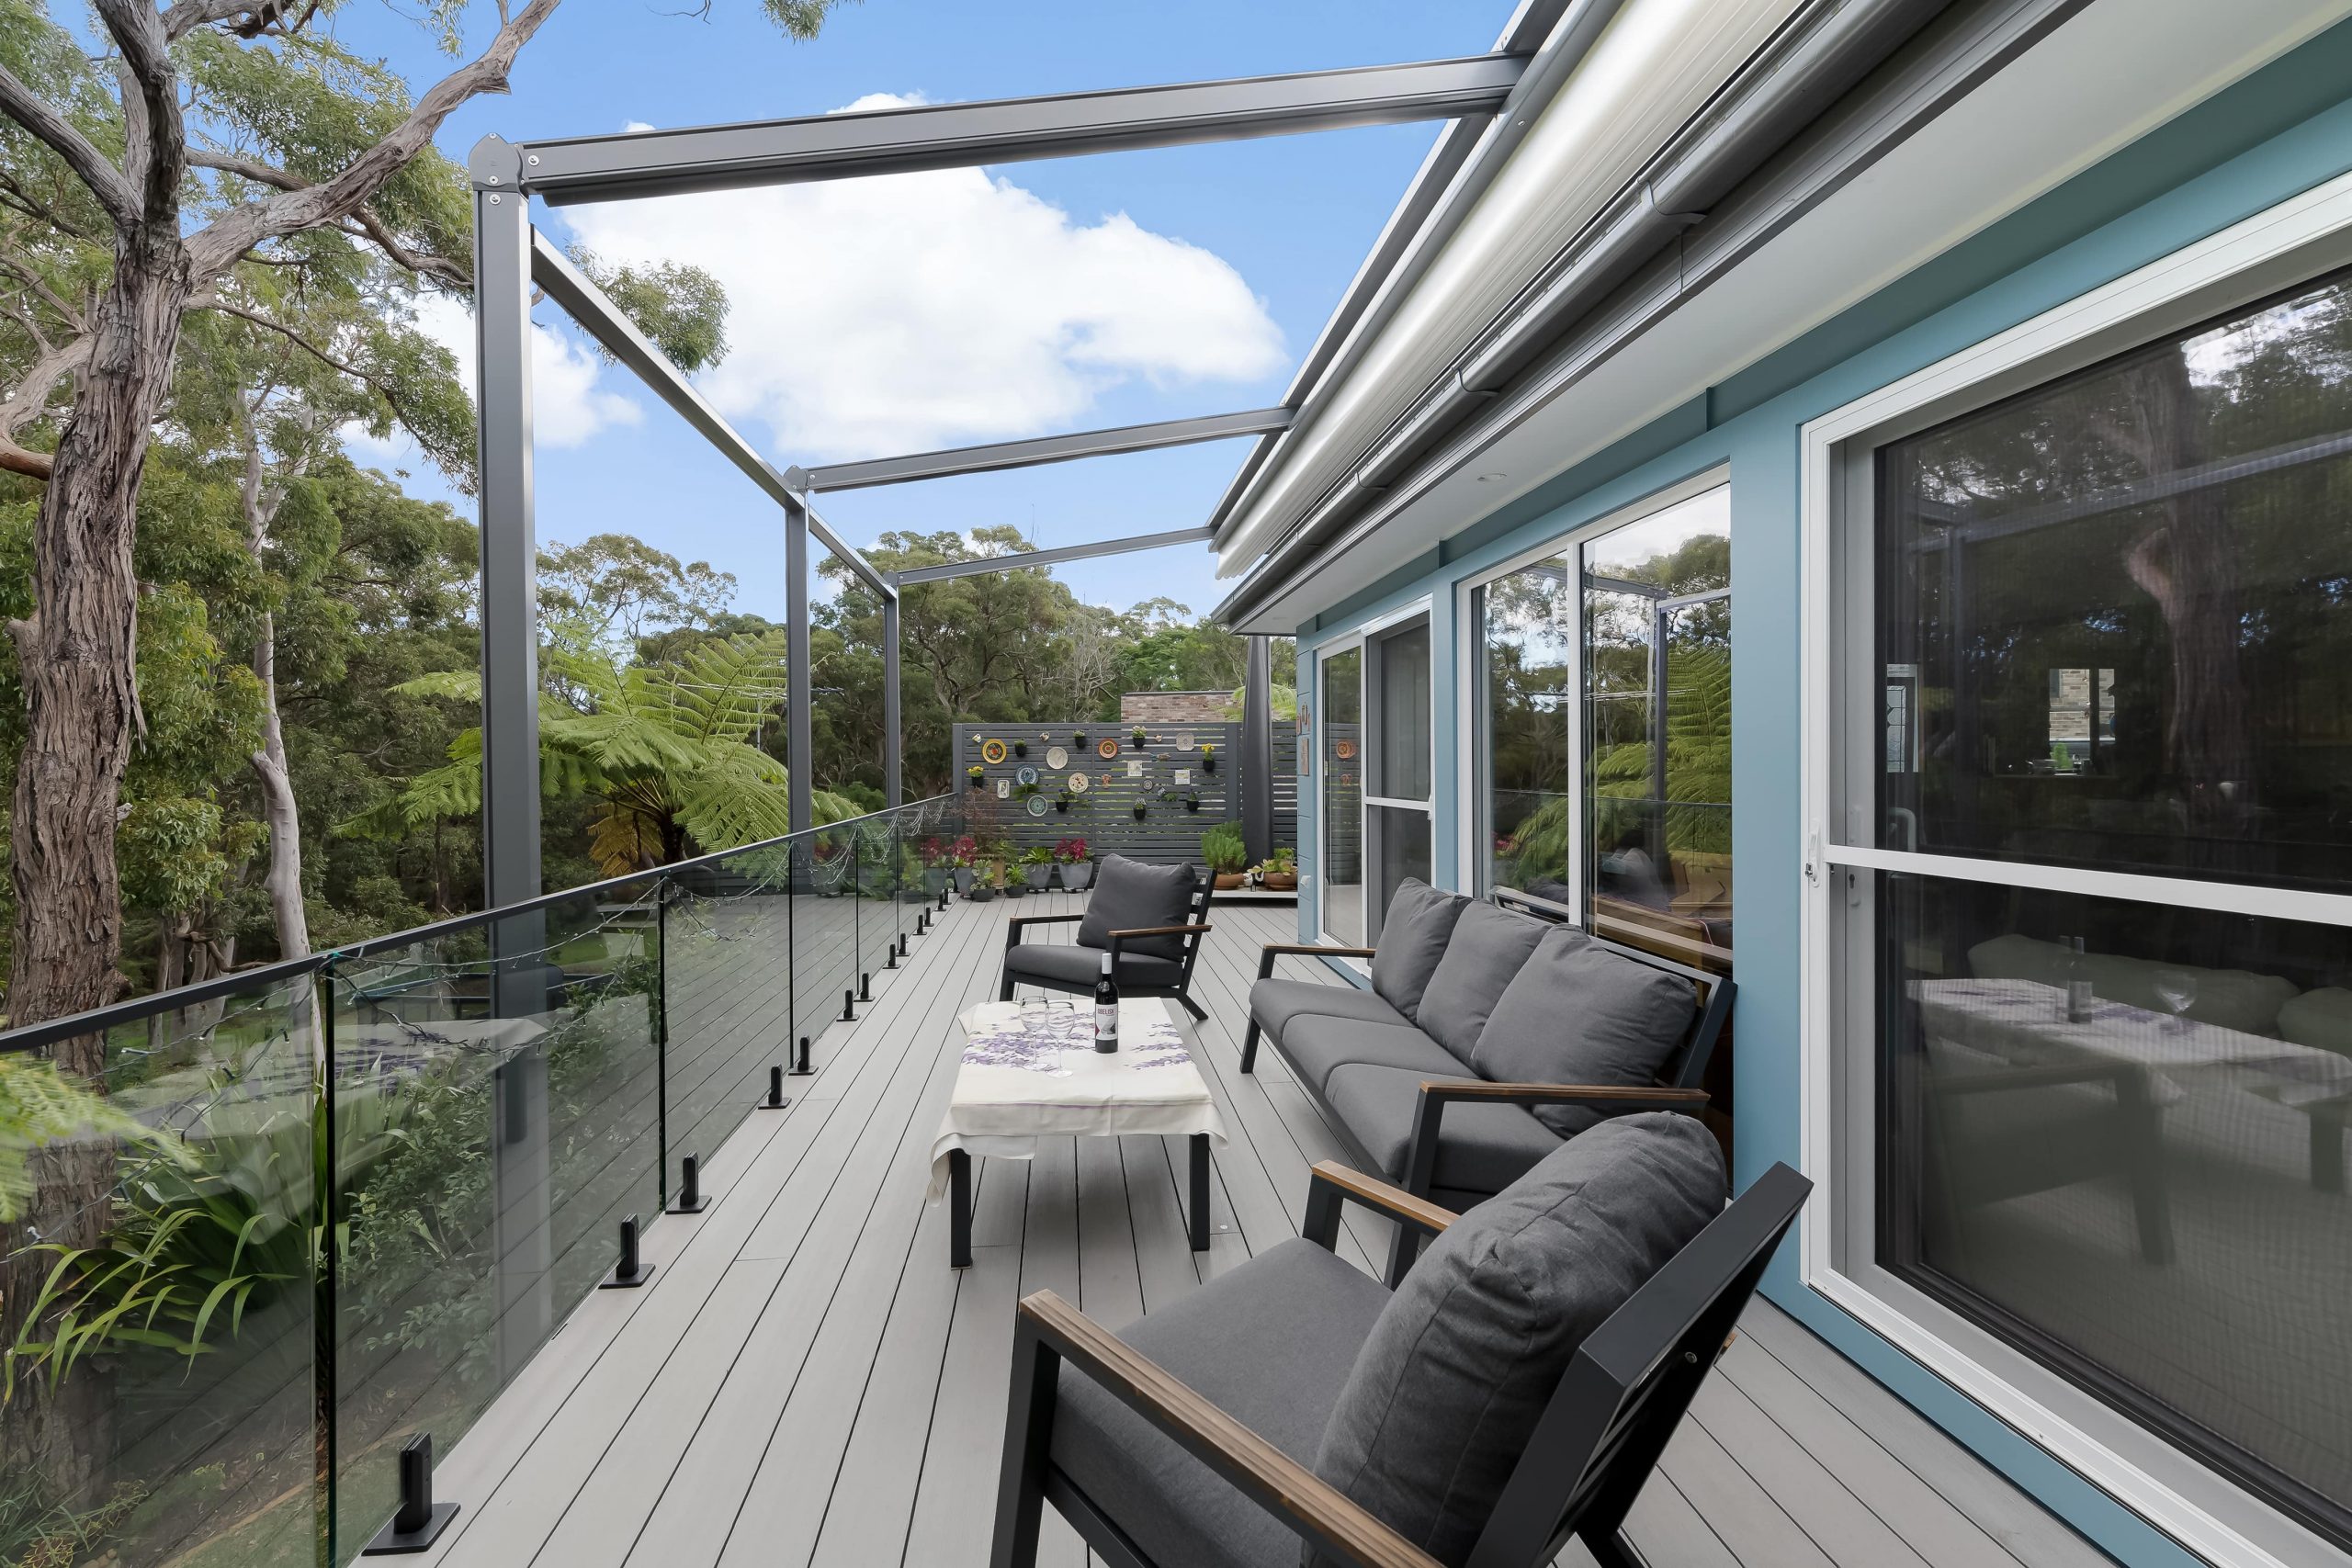 Mountain Ash composite deck with patio furniture on top